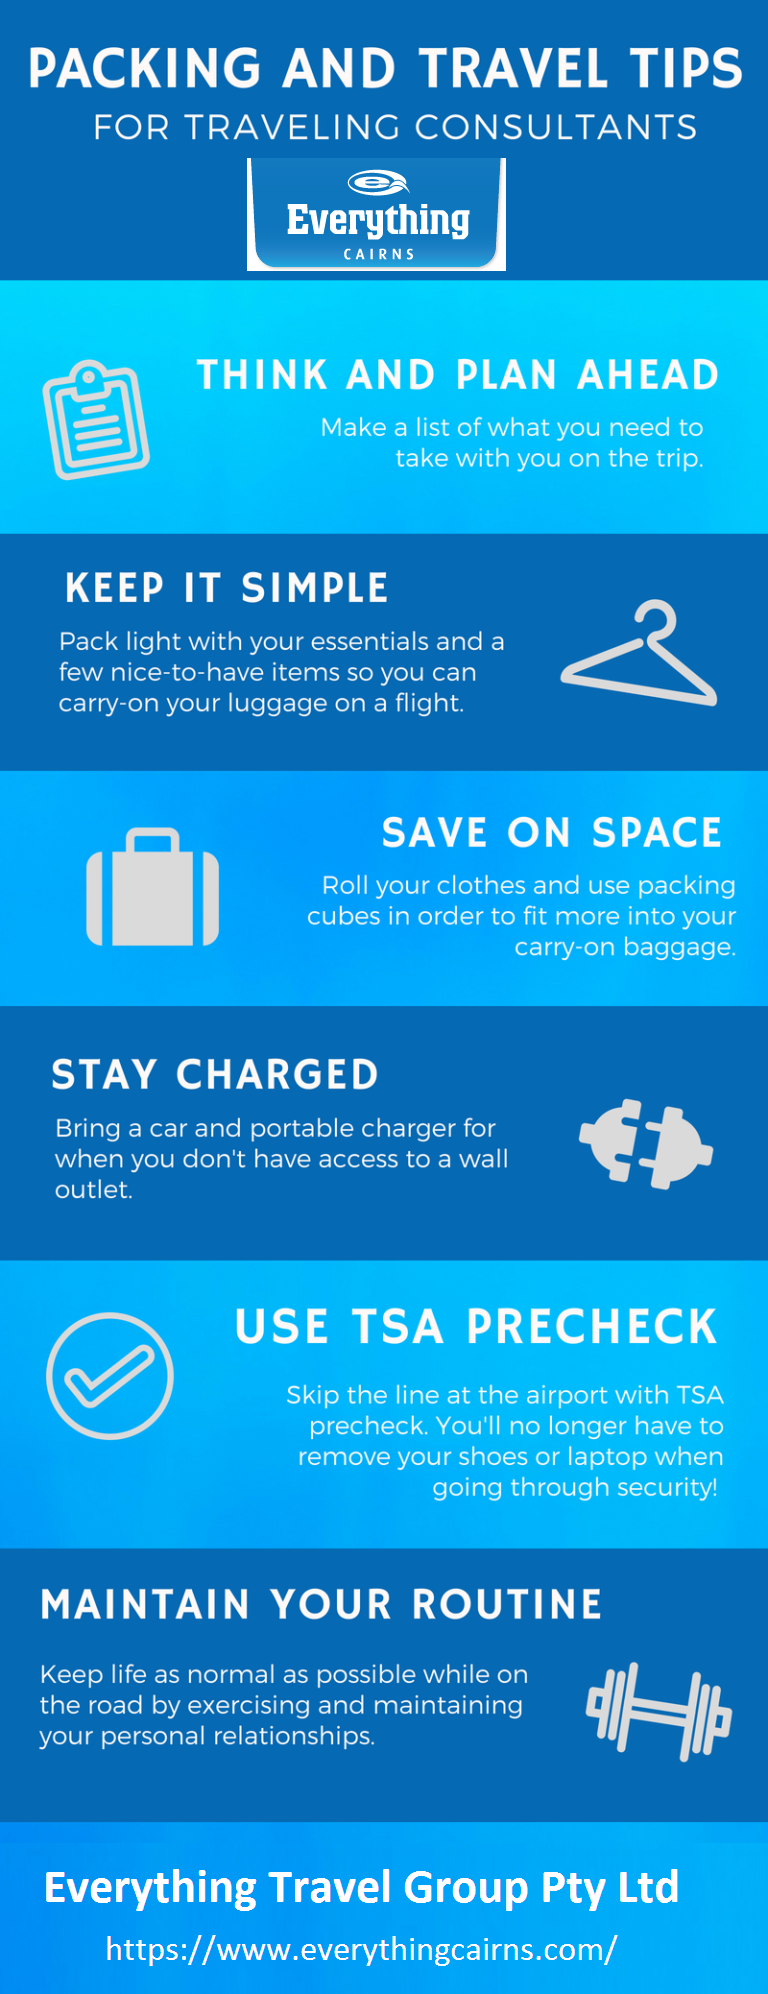 PACKING AND TRAVEL TIPS